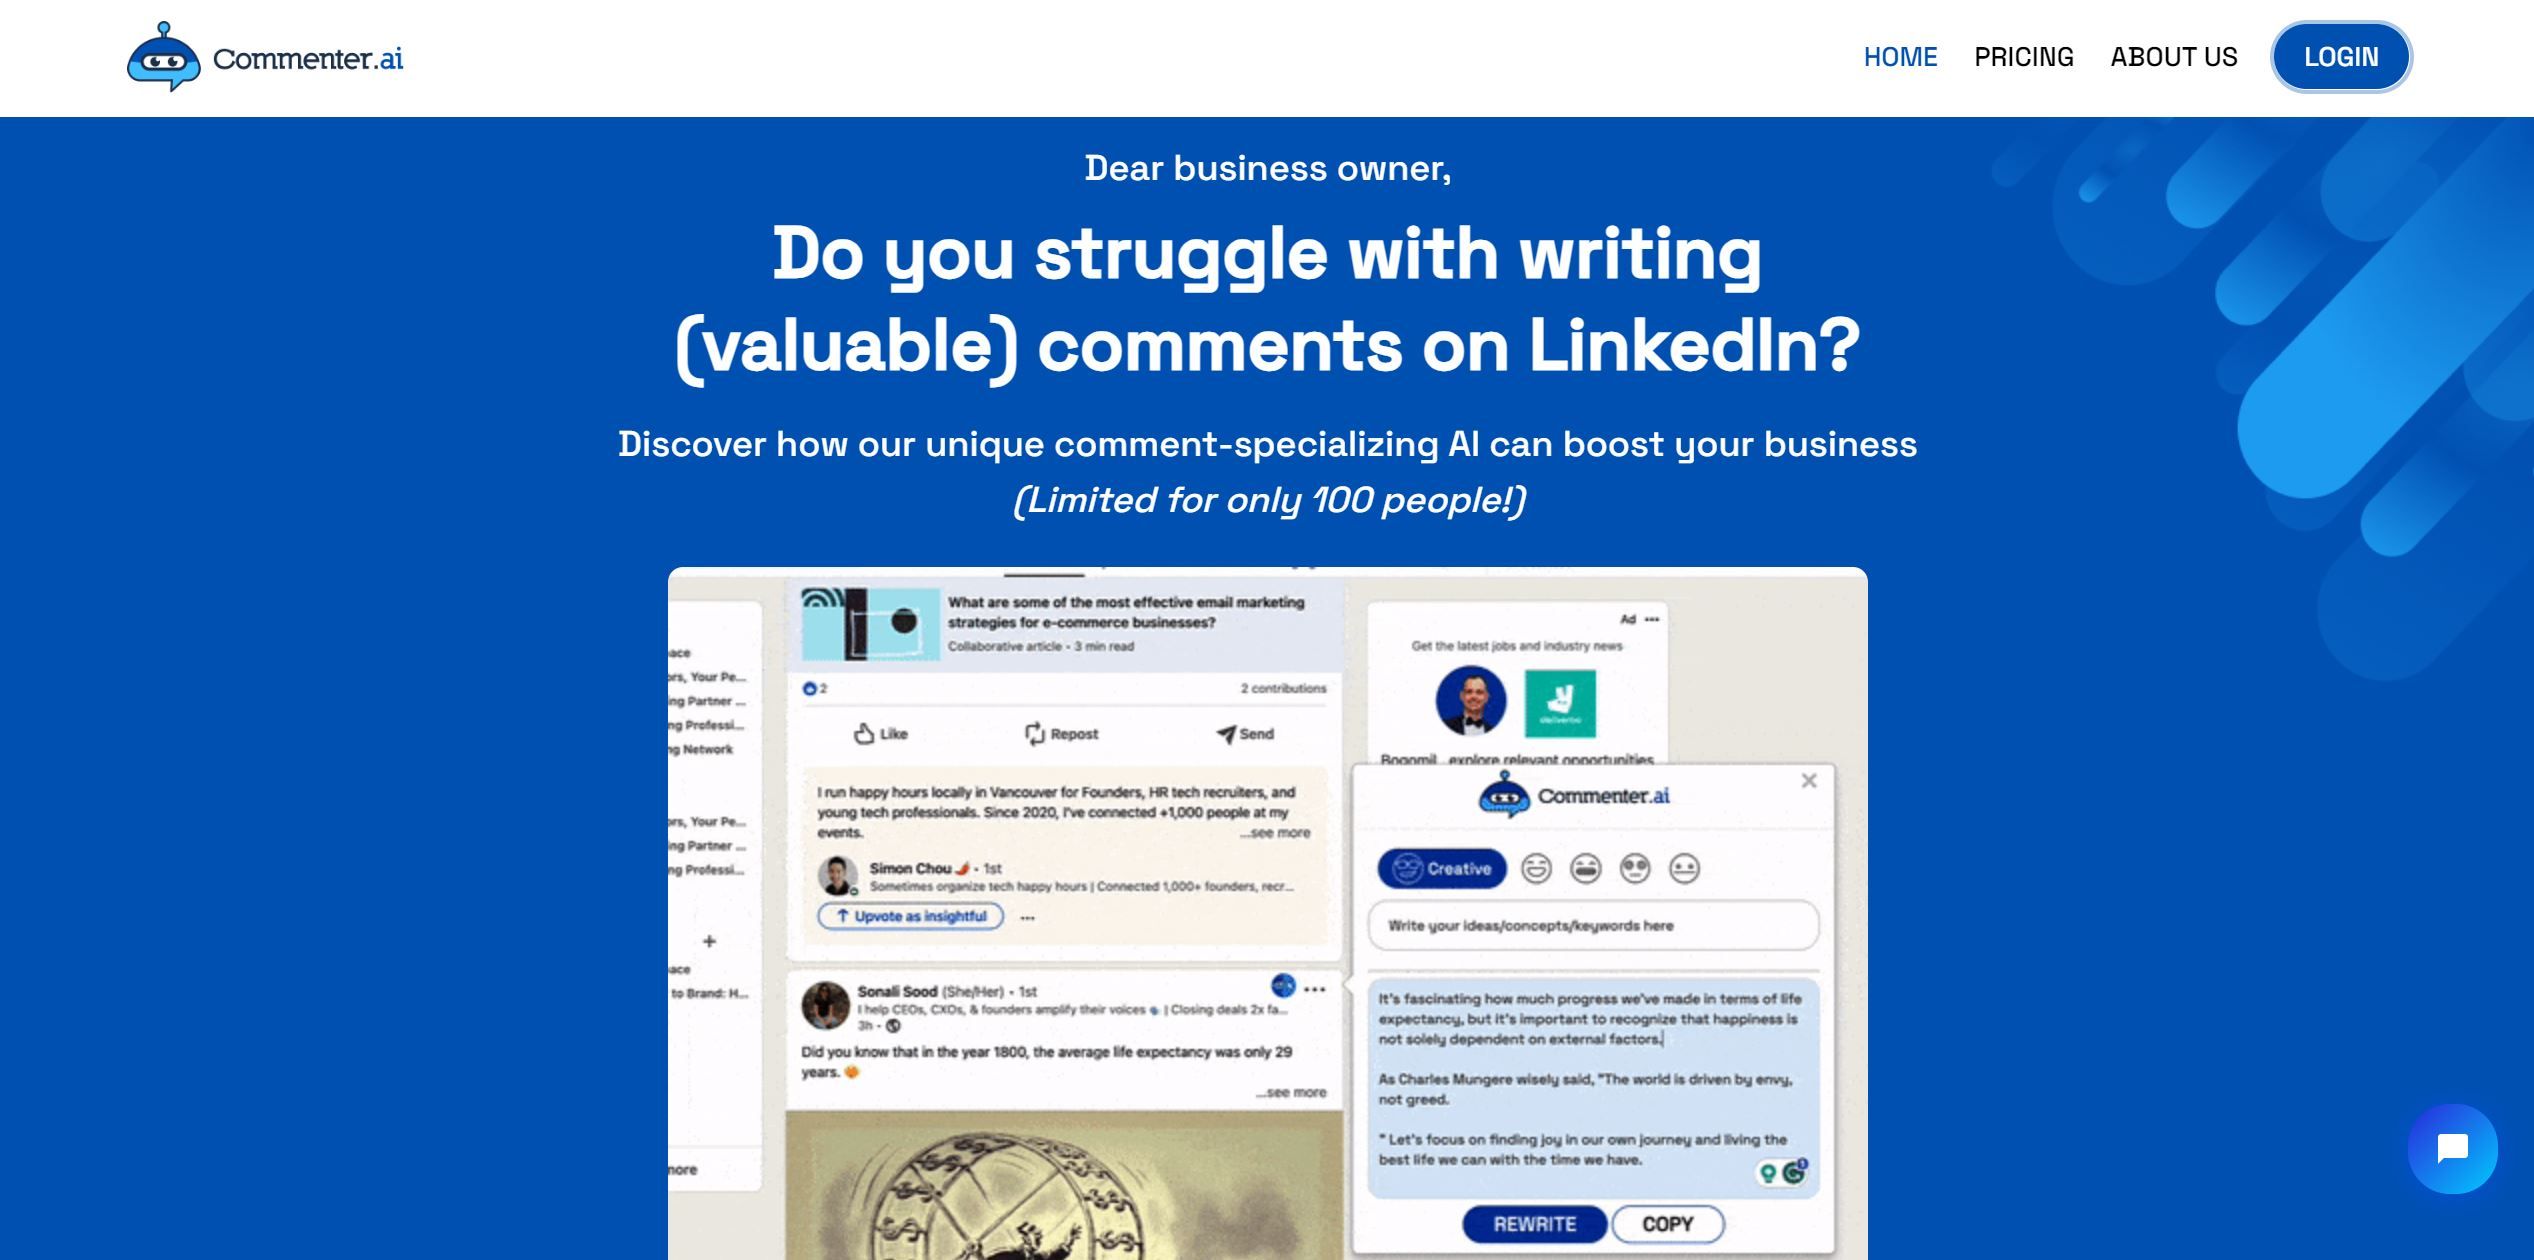  Generating LinkedIn comments more efficiently.